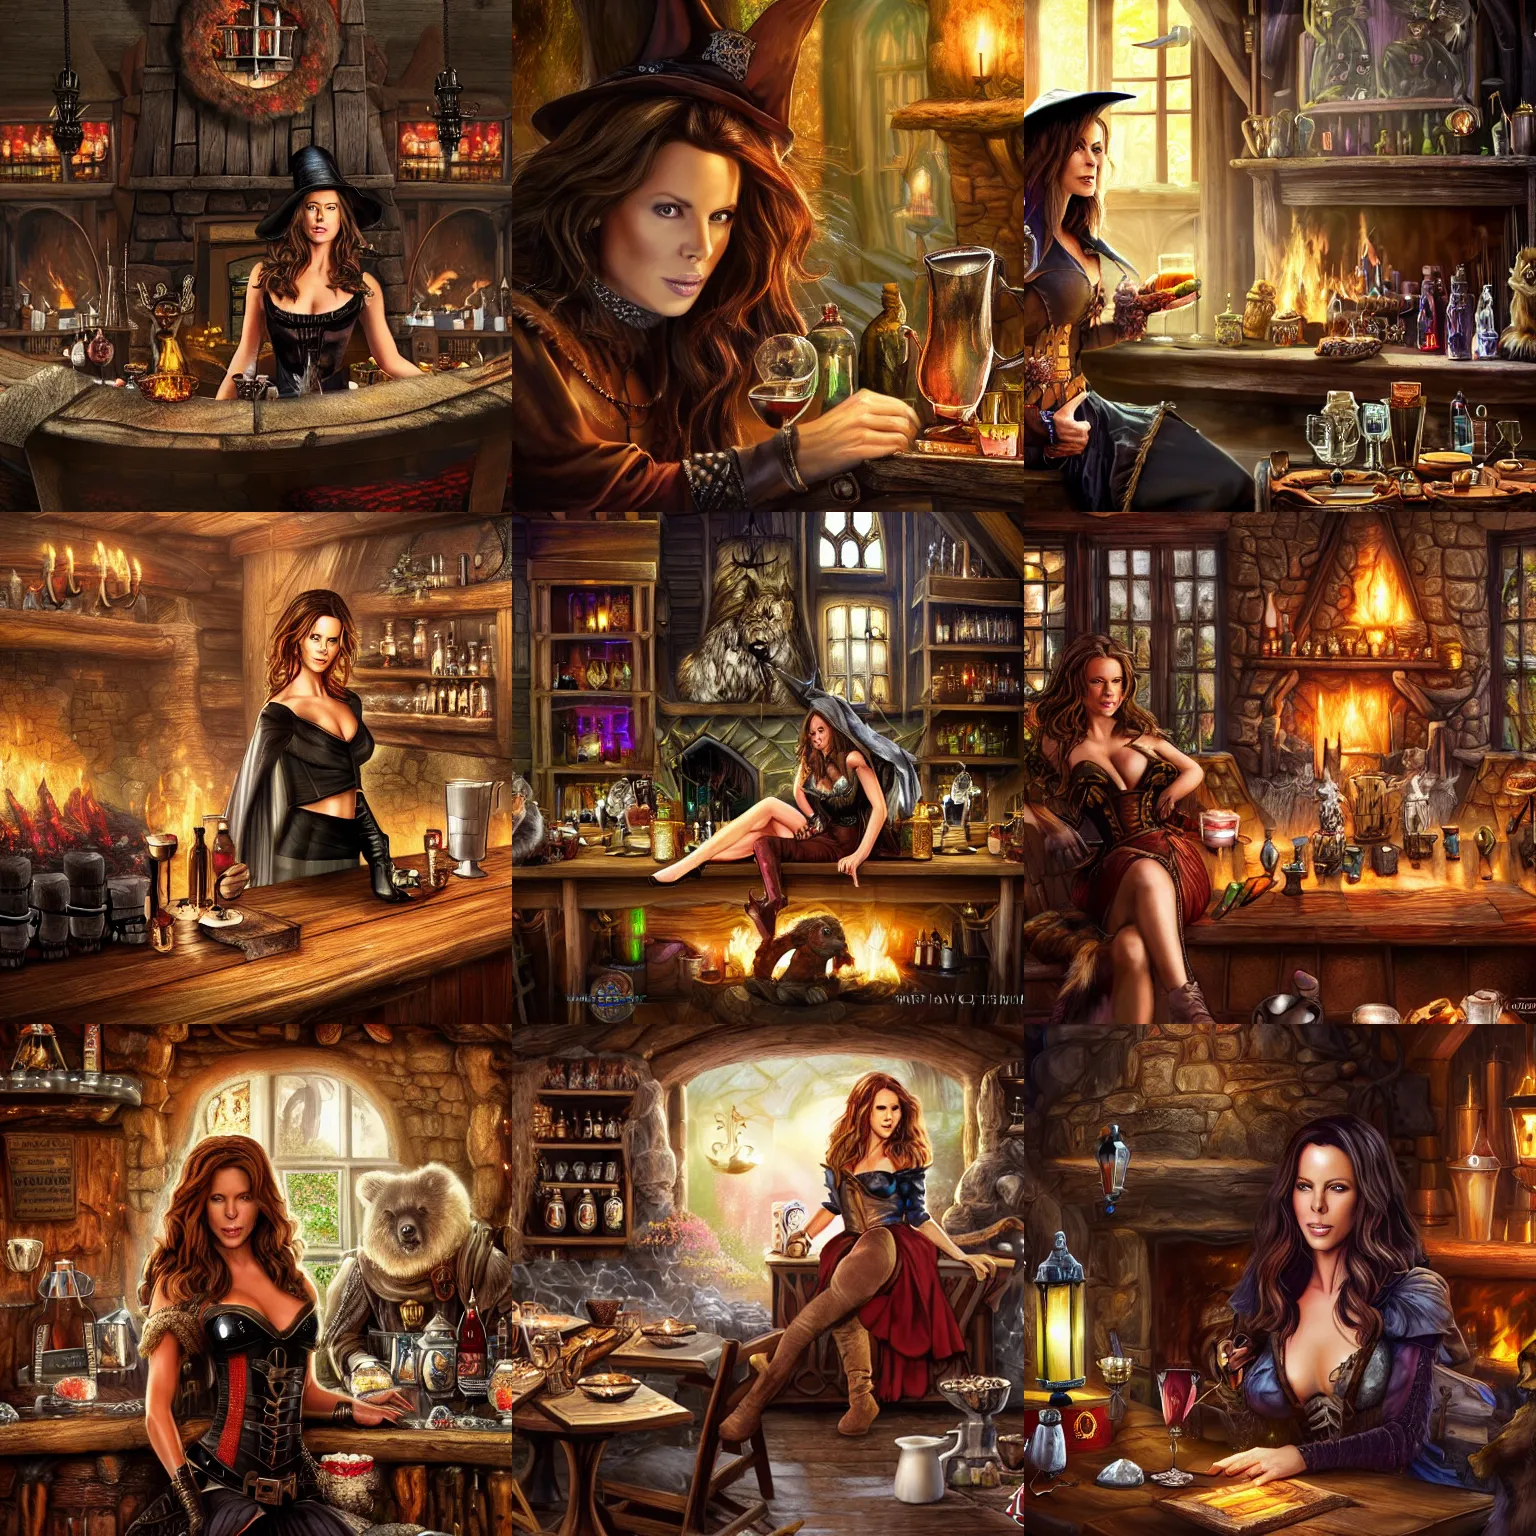 Prompt: kate beckinsale as witch, sit in fantasy tavern near fireplace, behind bar deck with bear mugs, medieval dnd, colorfull digital fantasy art, 4k